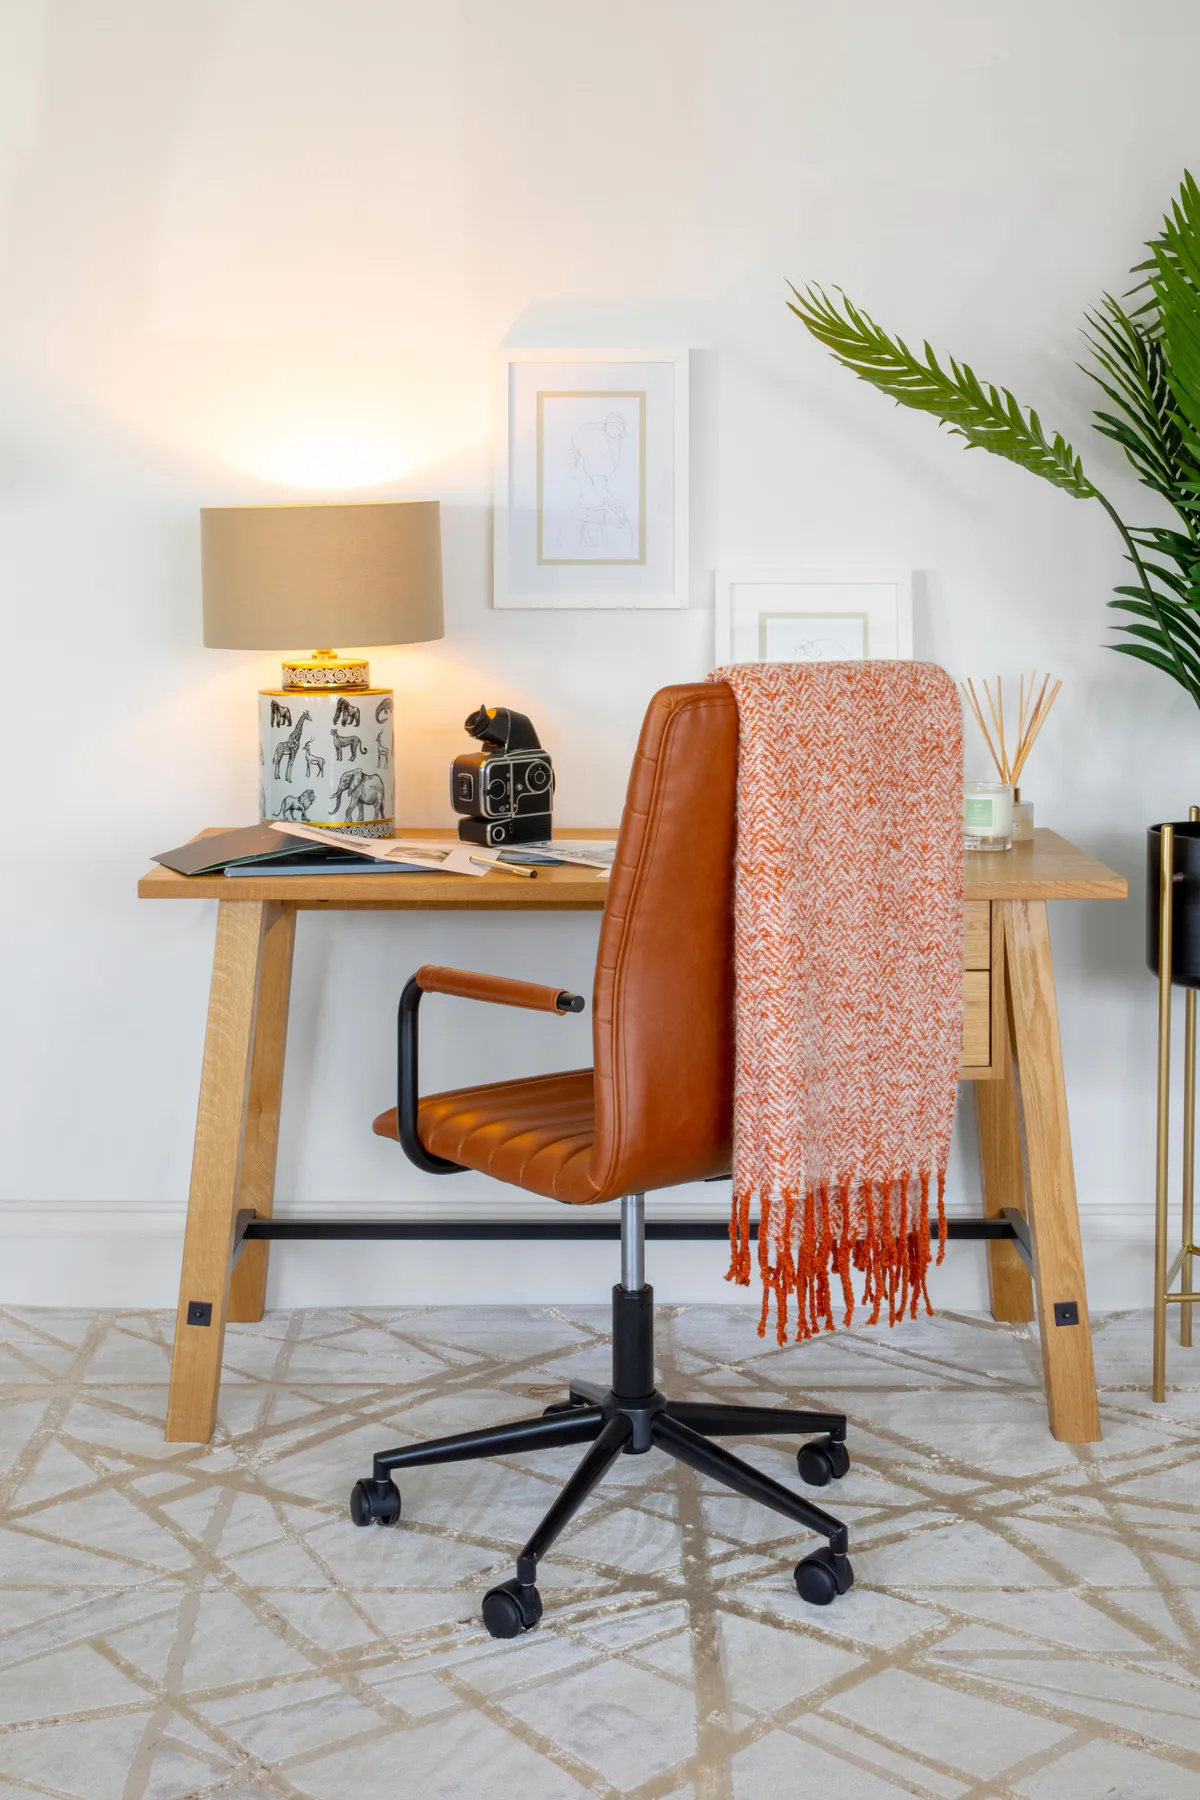 Home office ideas: How to create a productive work space